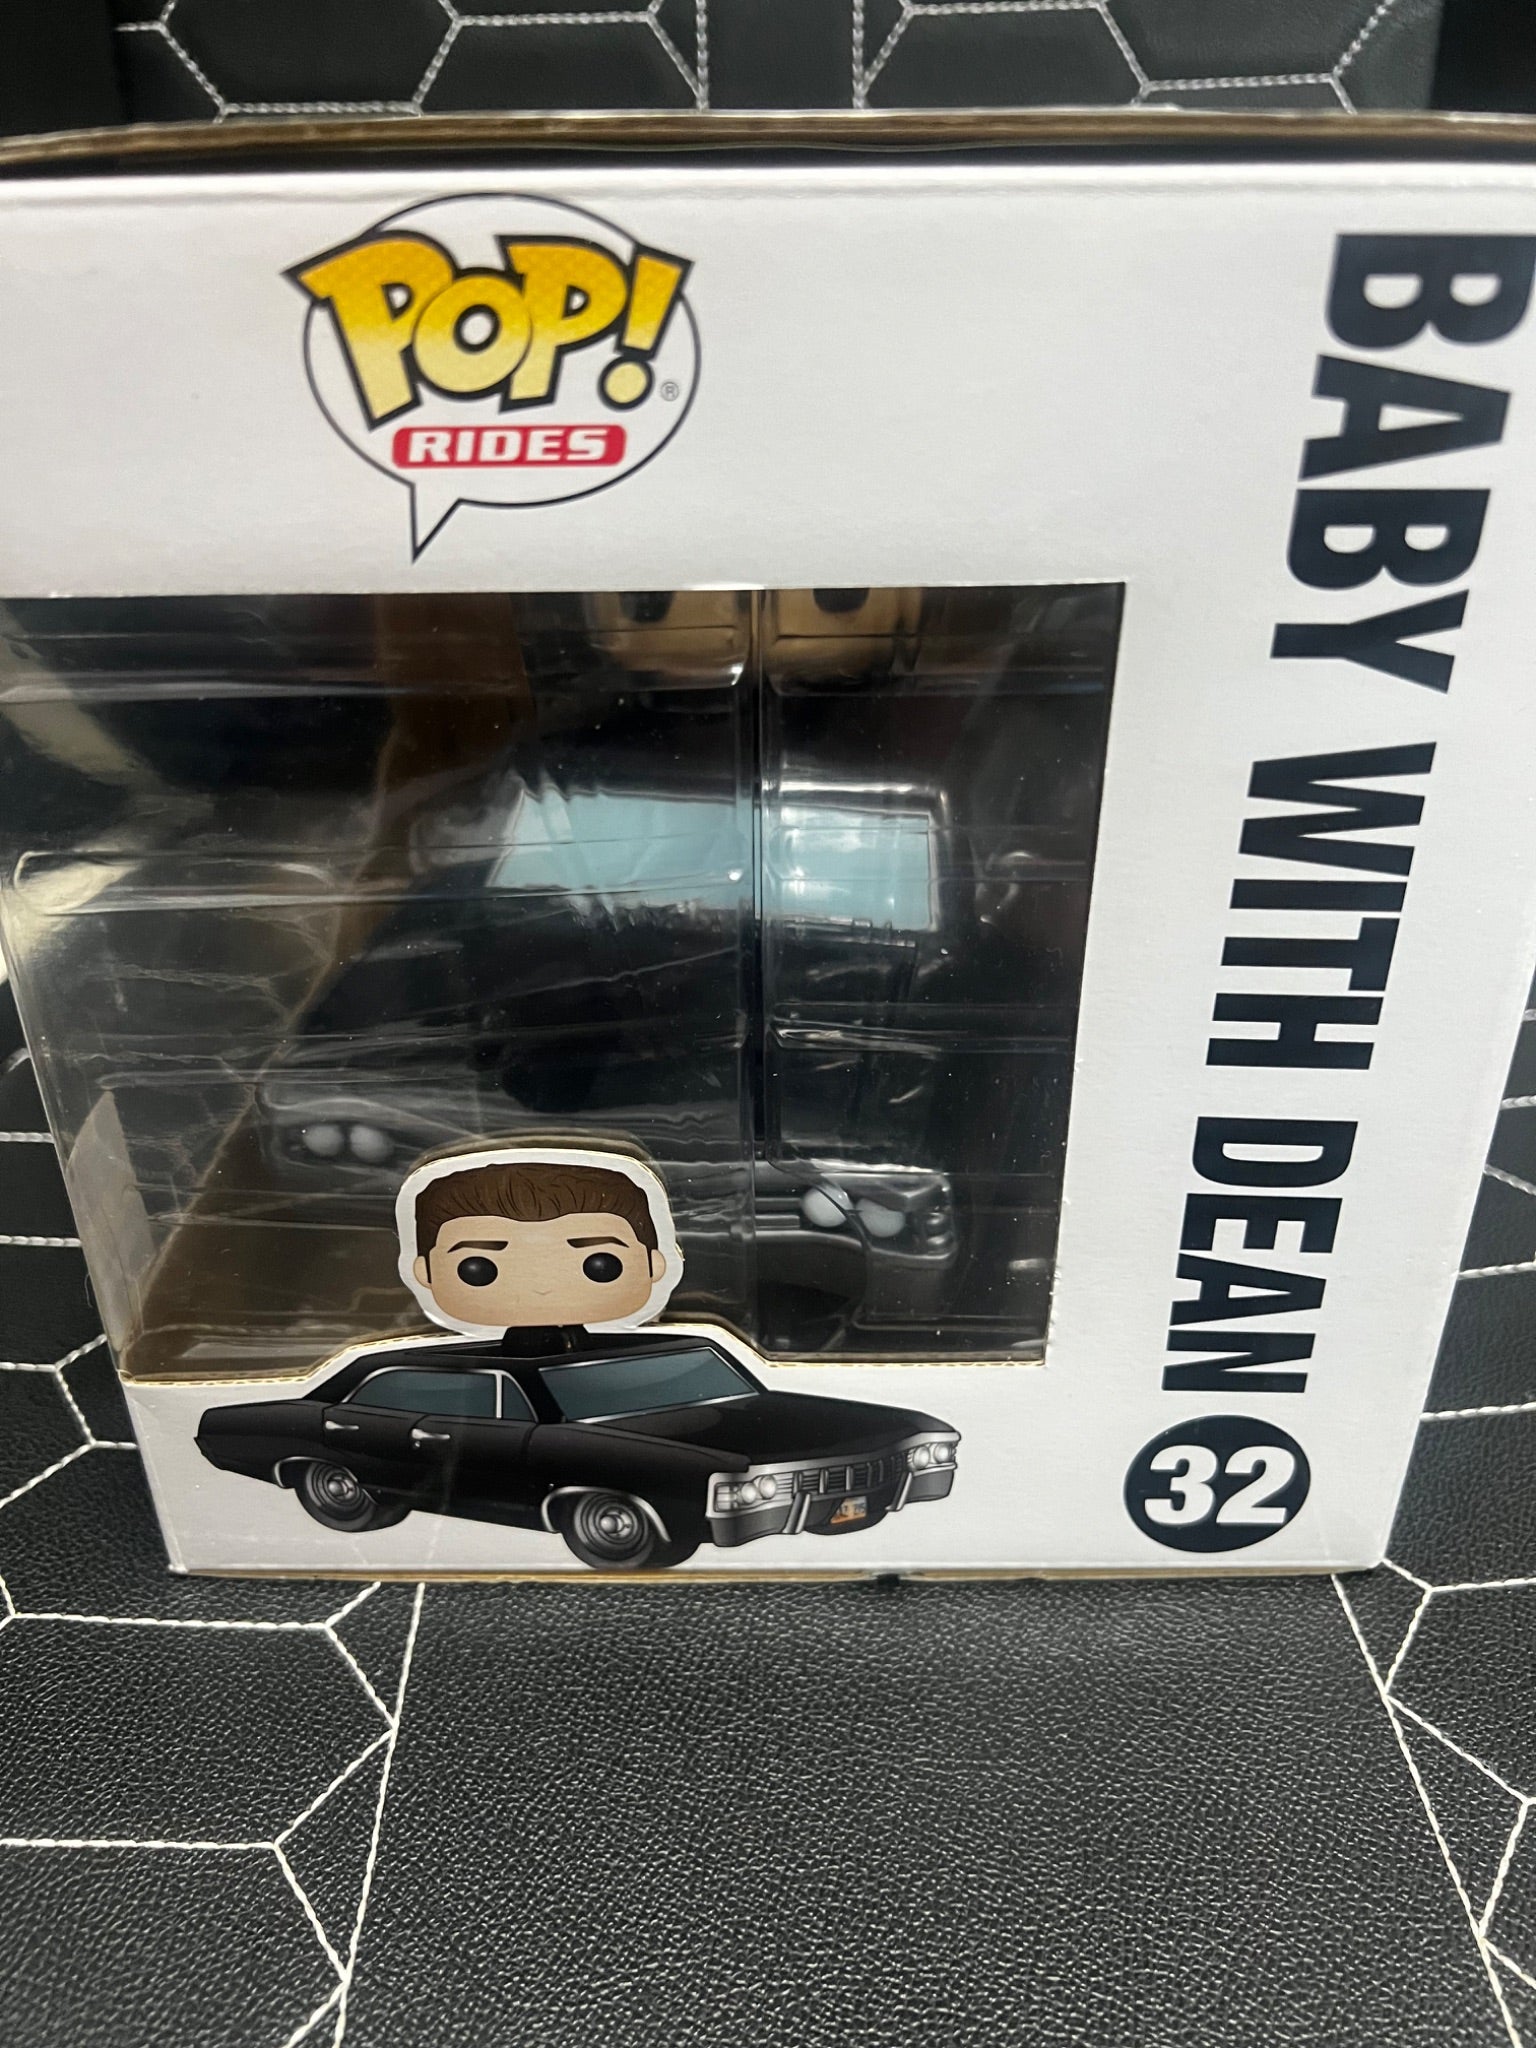 #32 - Dean Winchester with Baby (2017 Summer Convention Exclusive) - Supernatural - Funko Pop Rides - 3